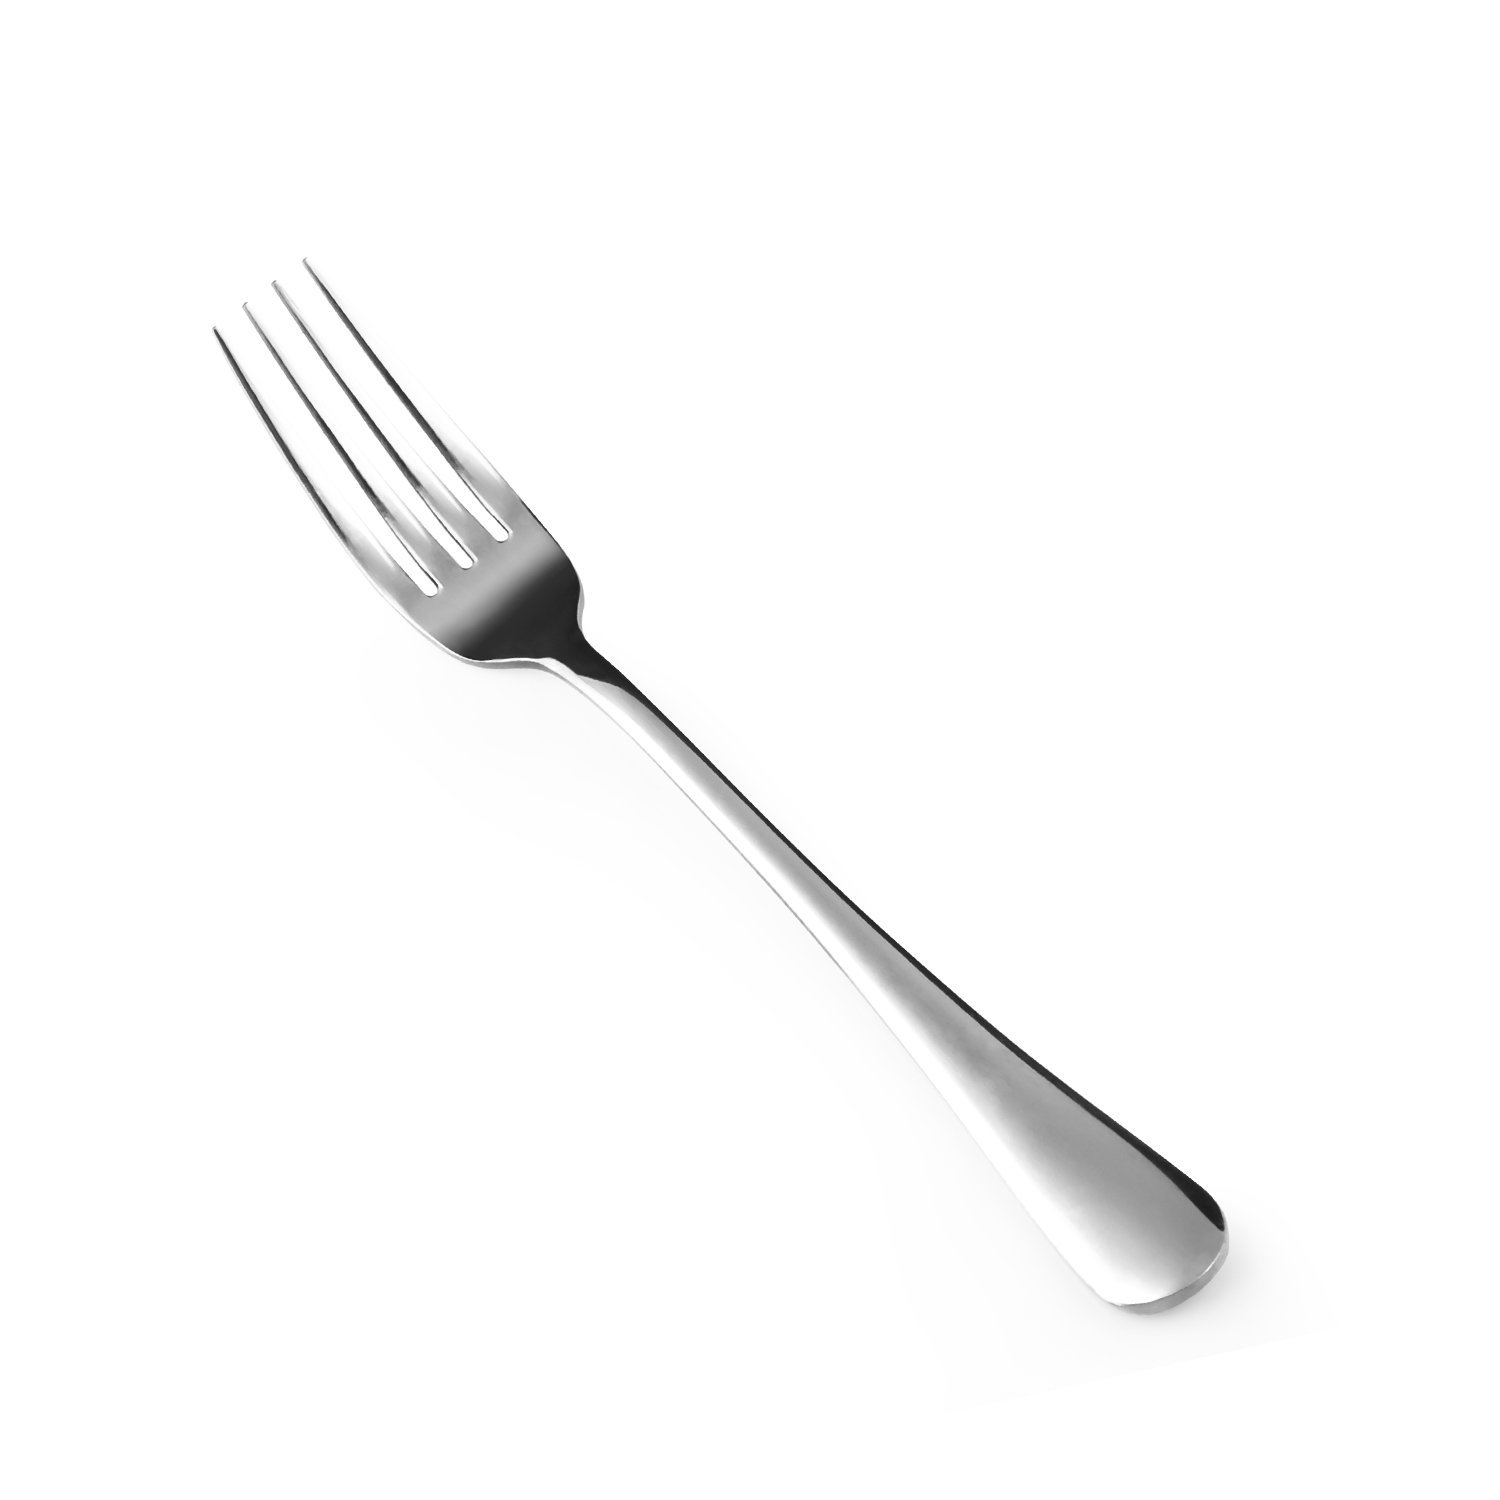 Amazon.com: Hiware 12-piece Good Stainless Steel Dinner Forks ...